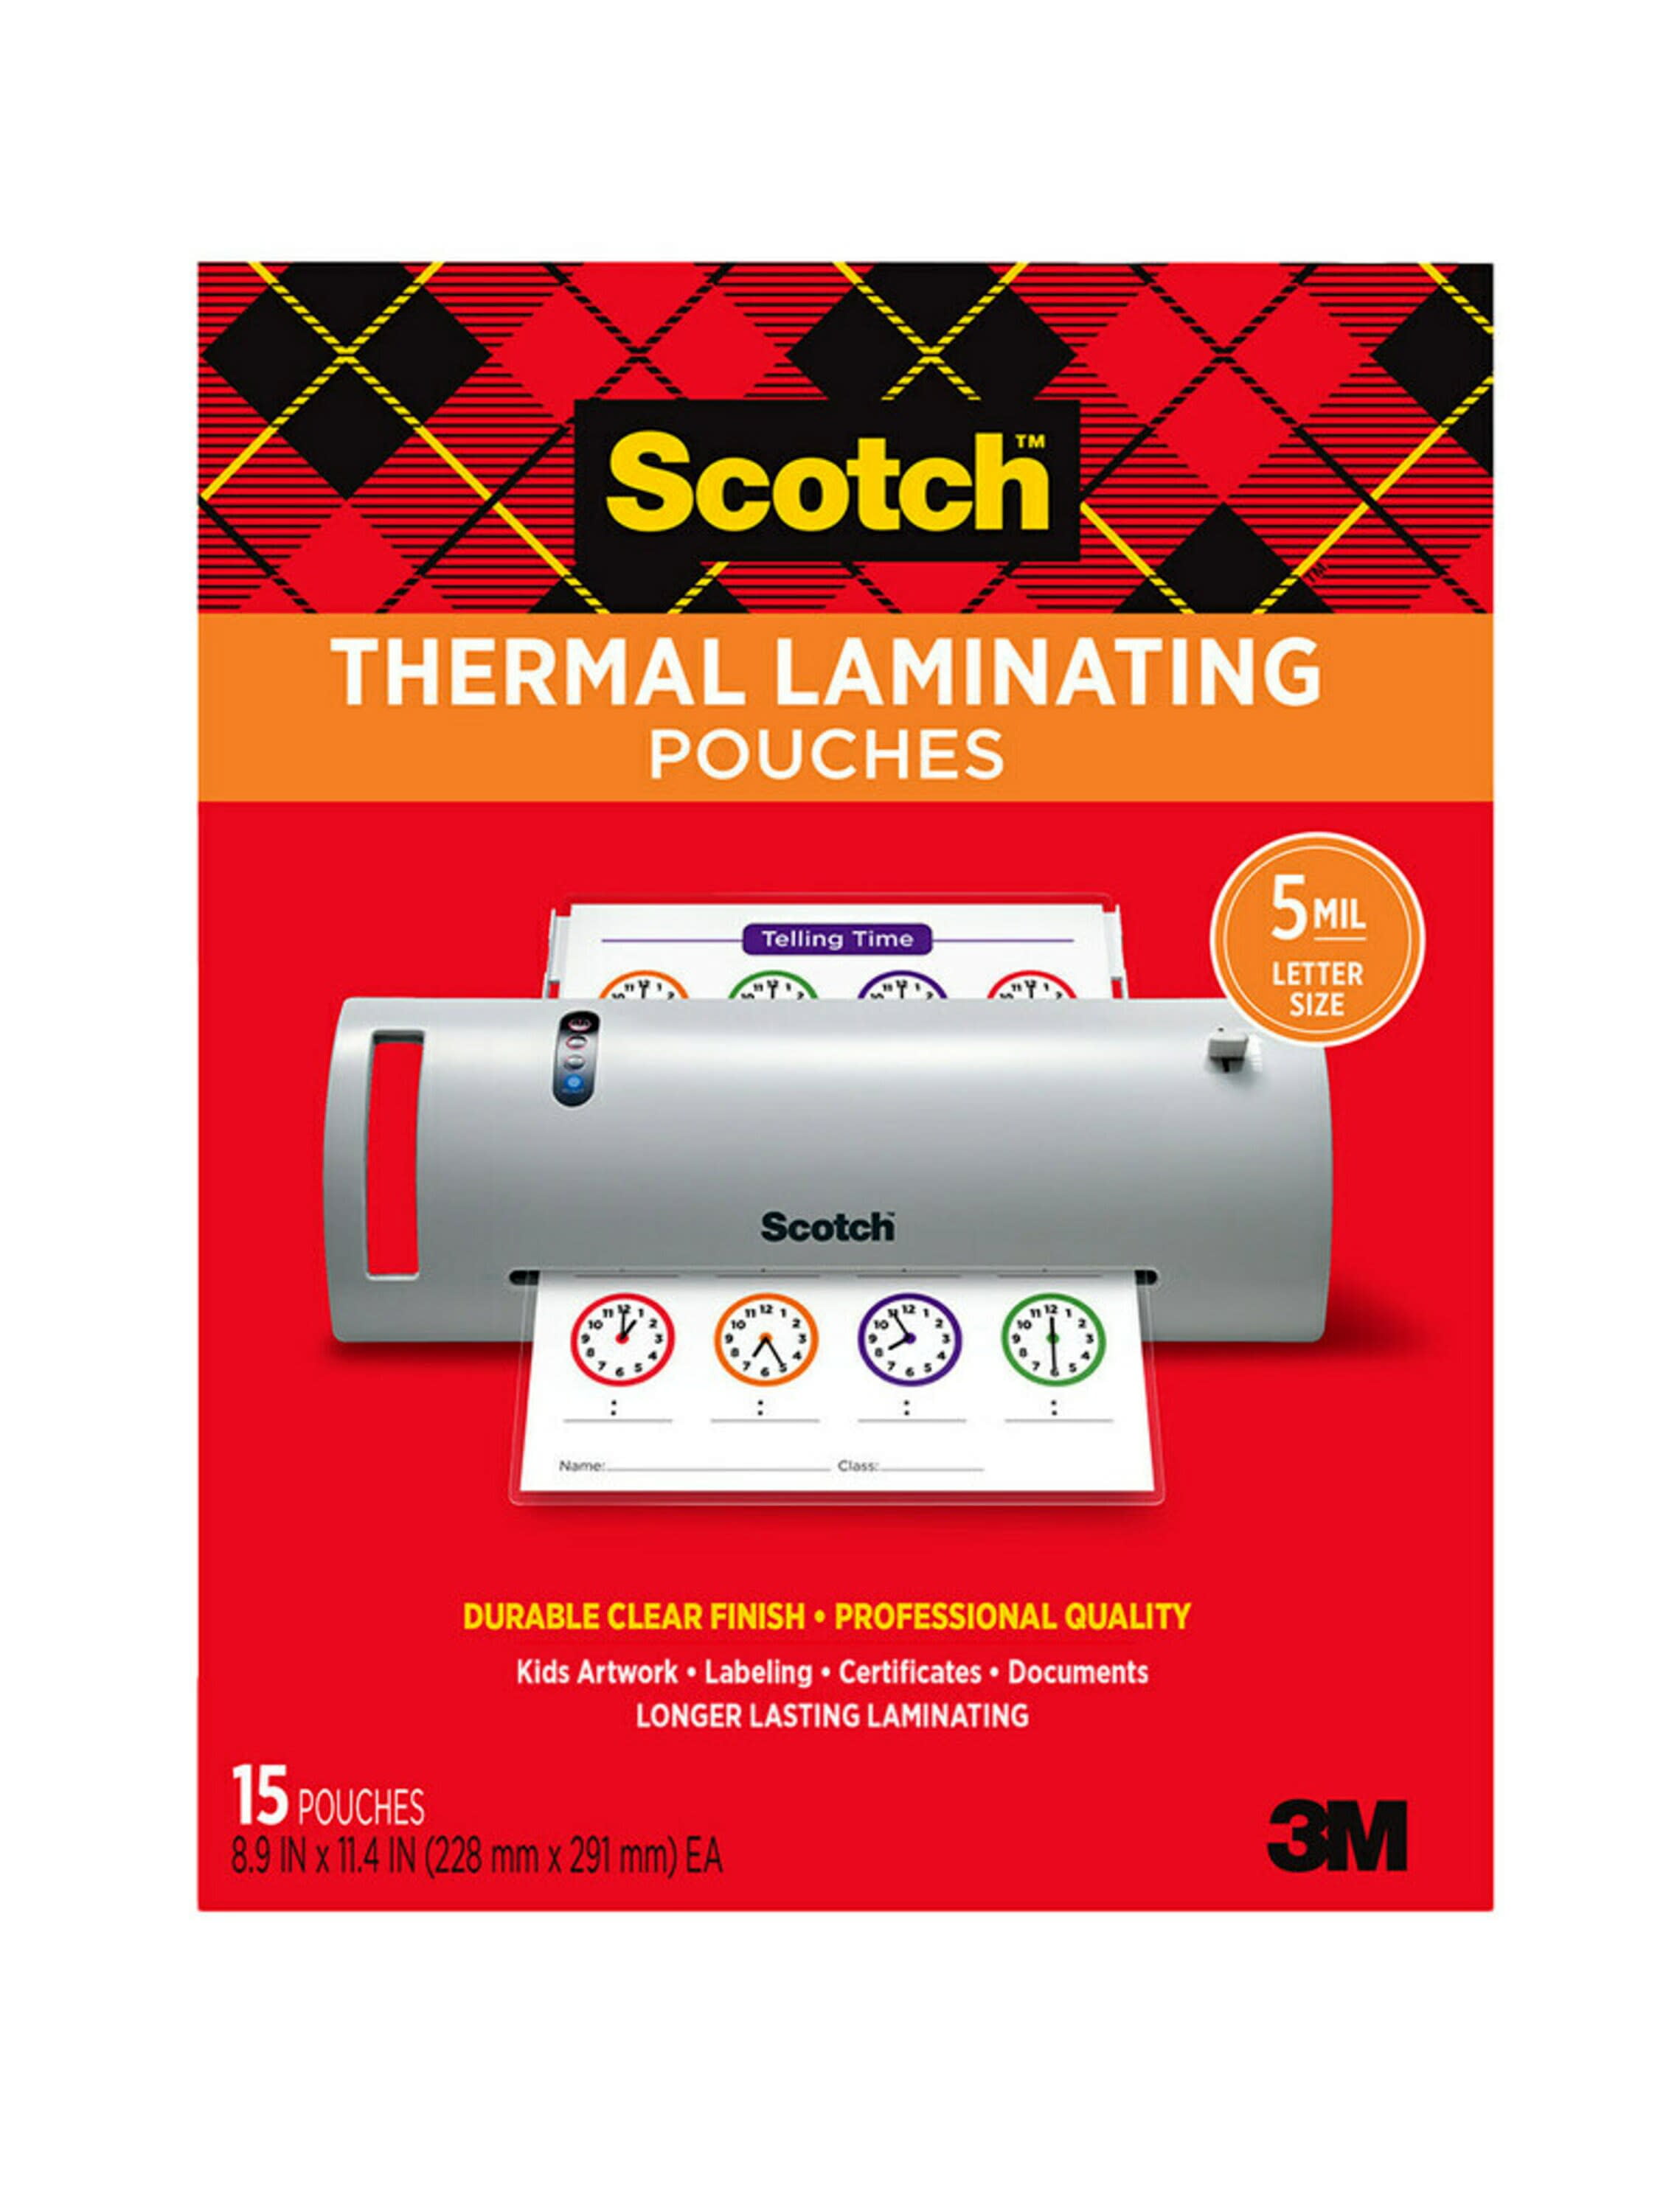 Plus 10 Laminate Pouches on Today Only for sale online 3m Scotch Thermal Laminator Tl902 